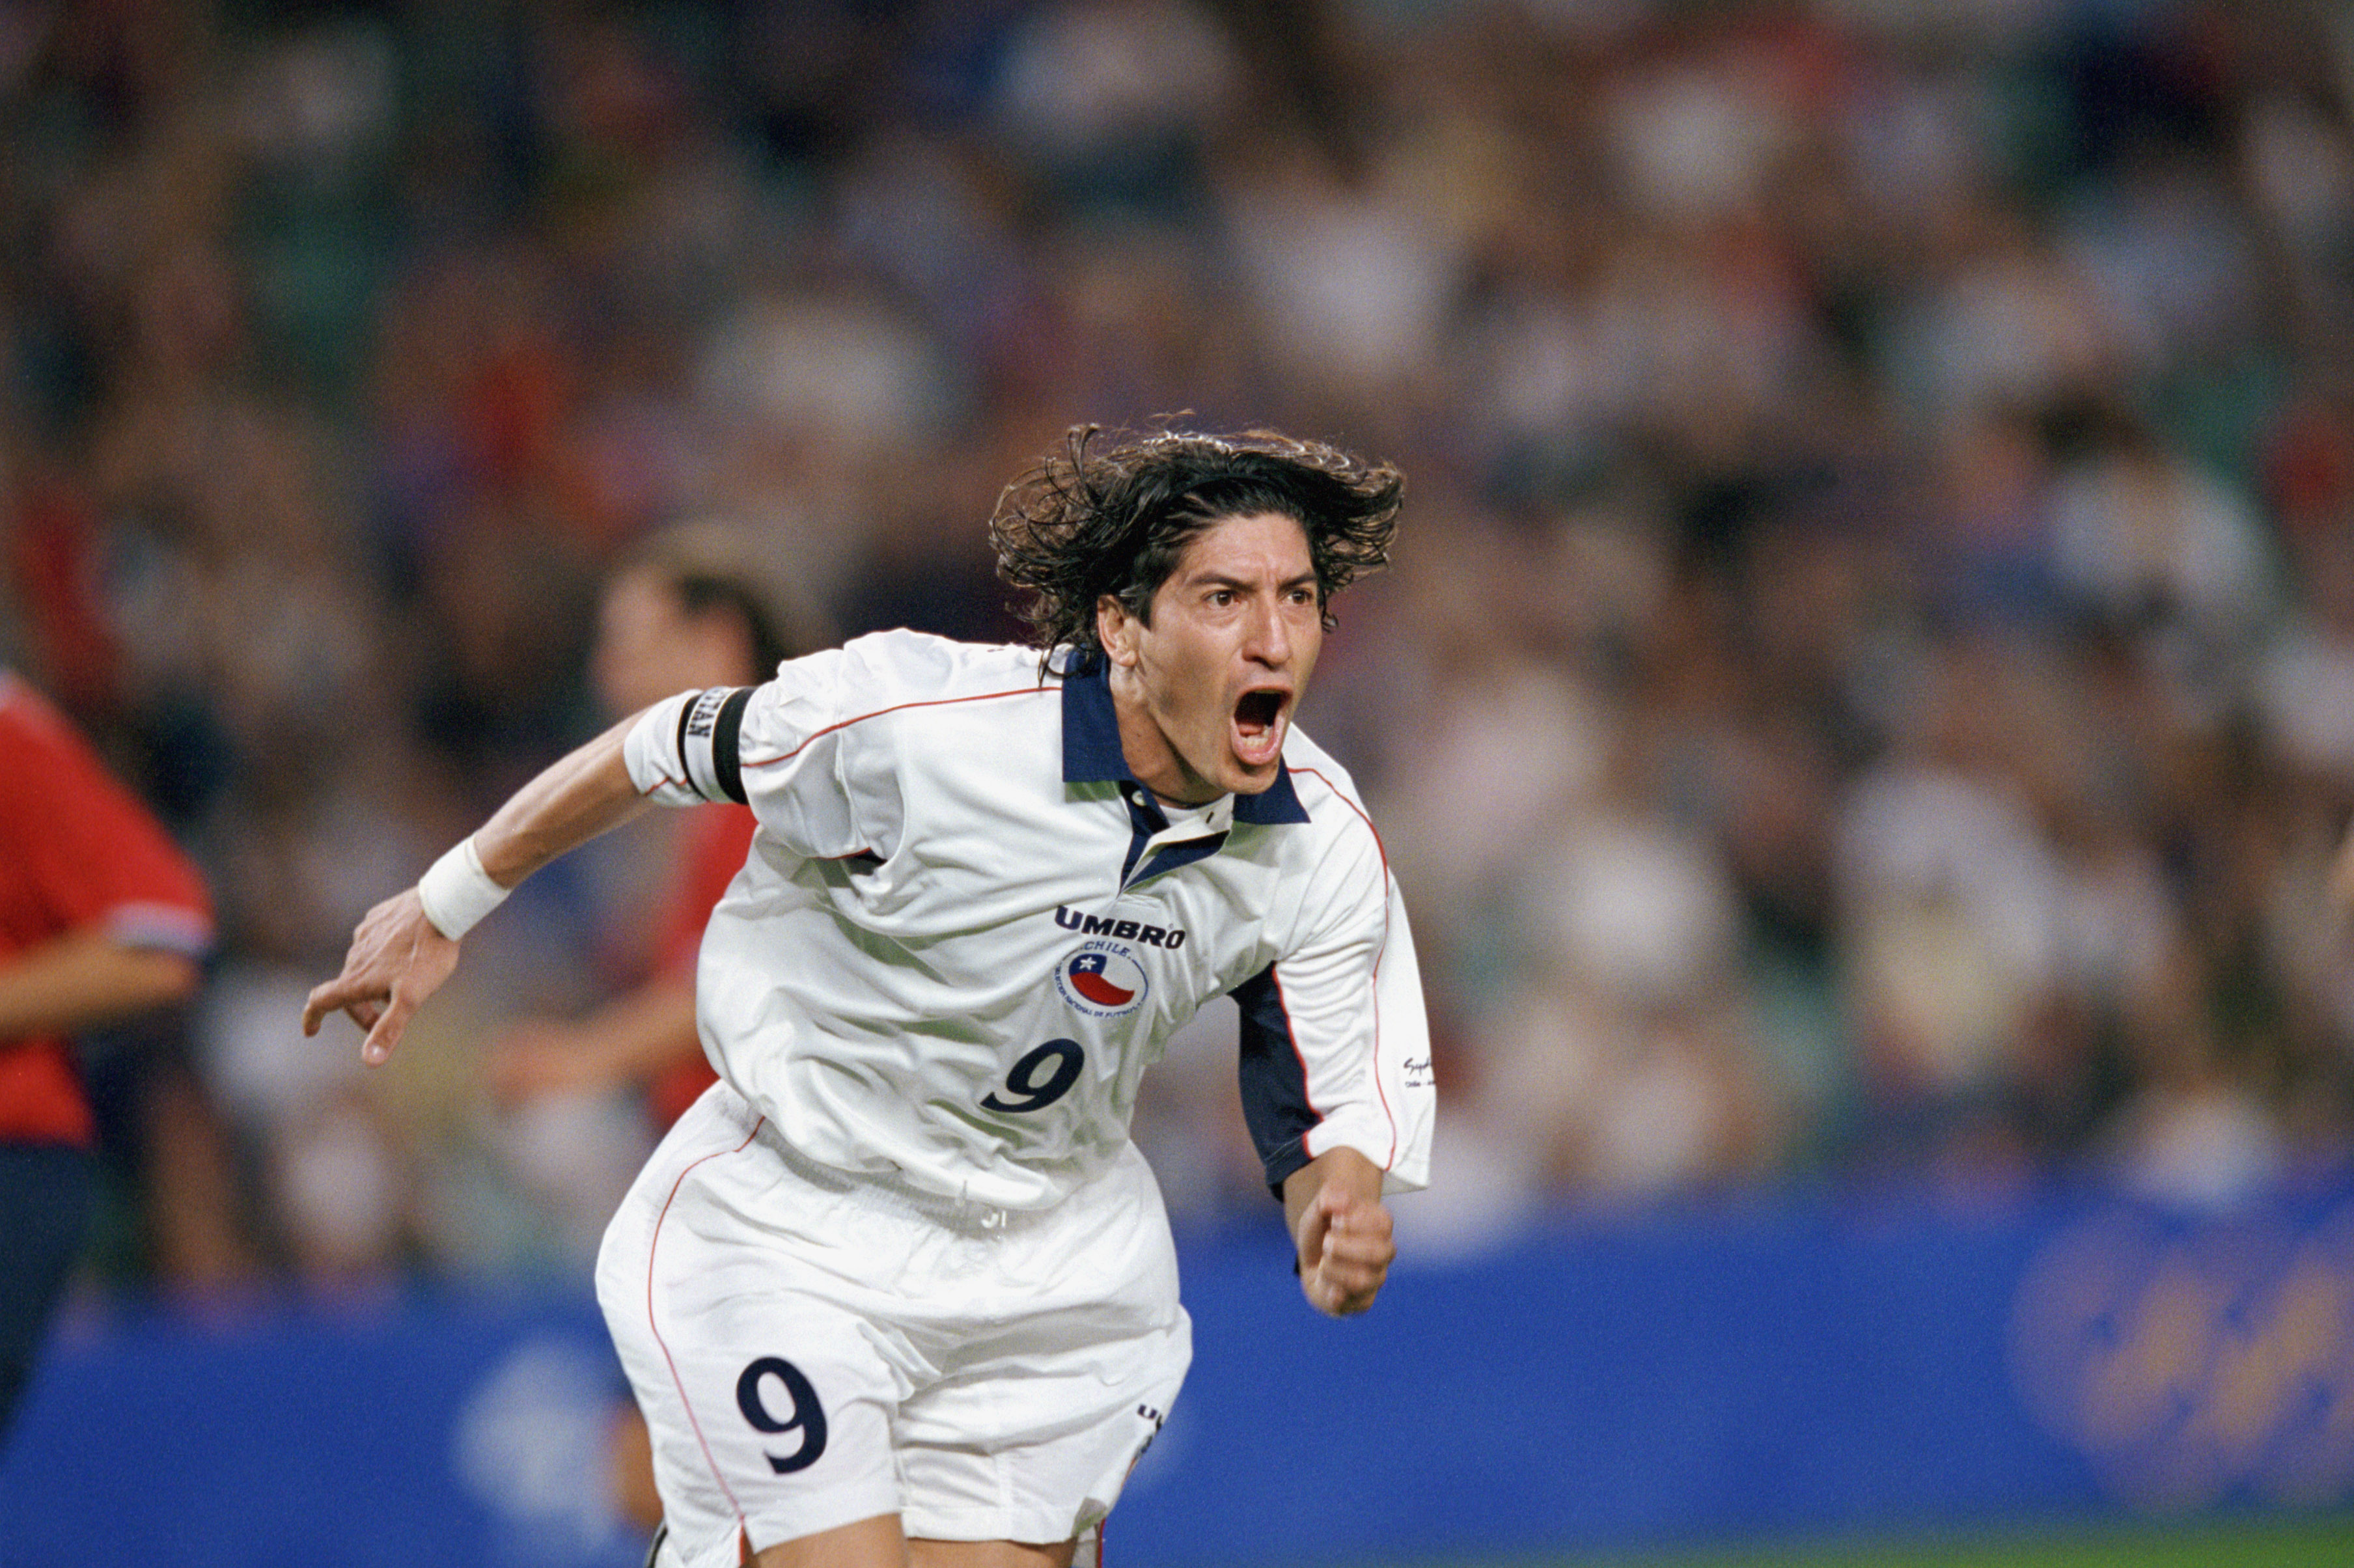 SYDNEY, AUSTRALIA - SEPTEMBER 29:  Ivan Zamorano #9 of Chile celebrates one of his two goals during the Olympic Men's Soccer Bronze Medal Game against the United States at Sydney Football Stadium in Sydney, Australia on September 29, 2000.  Chile won 2-0.